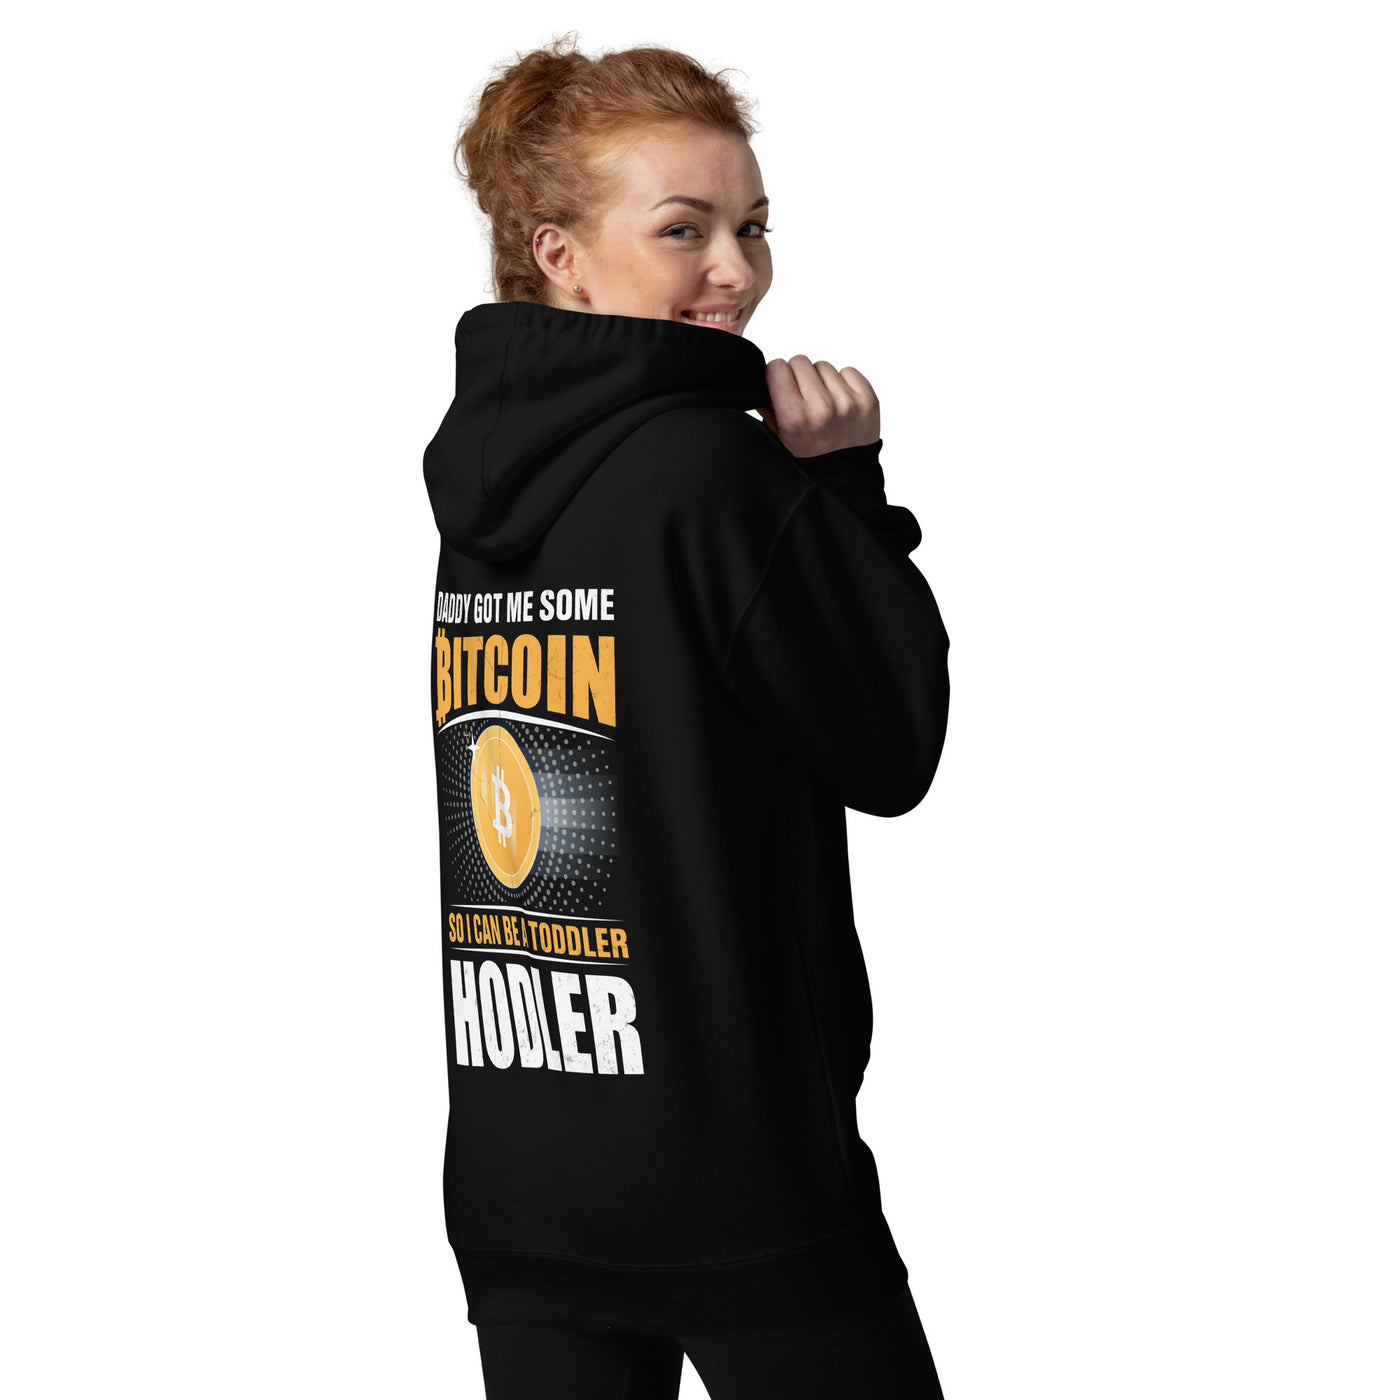 Daddy got me some Bitcoin, so I can be toddler holder - Unisex Hoodie  ( Back Print )